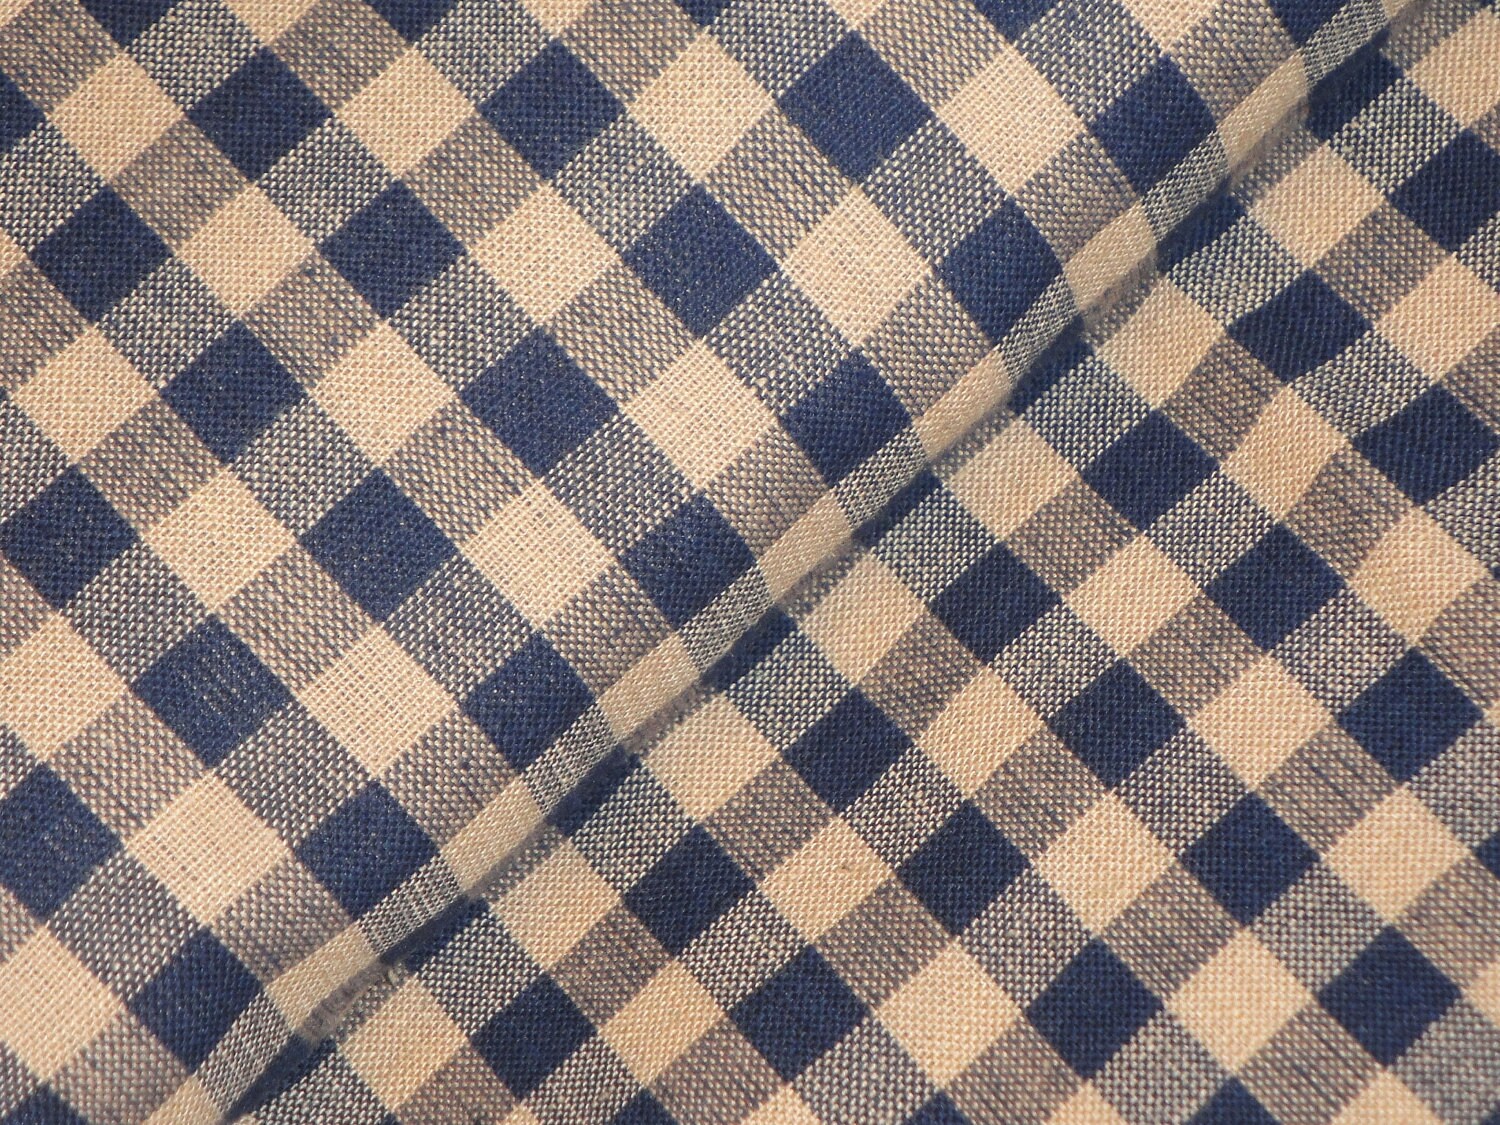 Quilt Home Decor Country Rustic Sewing Fabric REMNANT 27 x 44 Large Check Navy And Natural Tan Woven Cotton Primitive Homespun Fabric